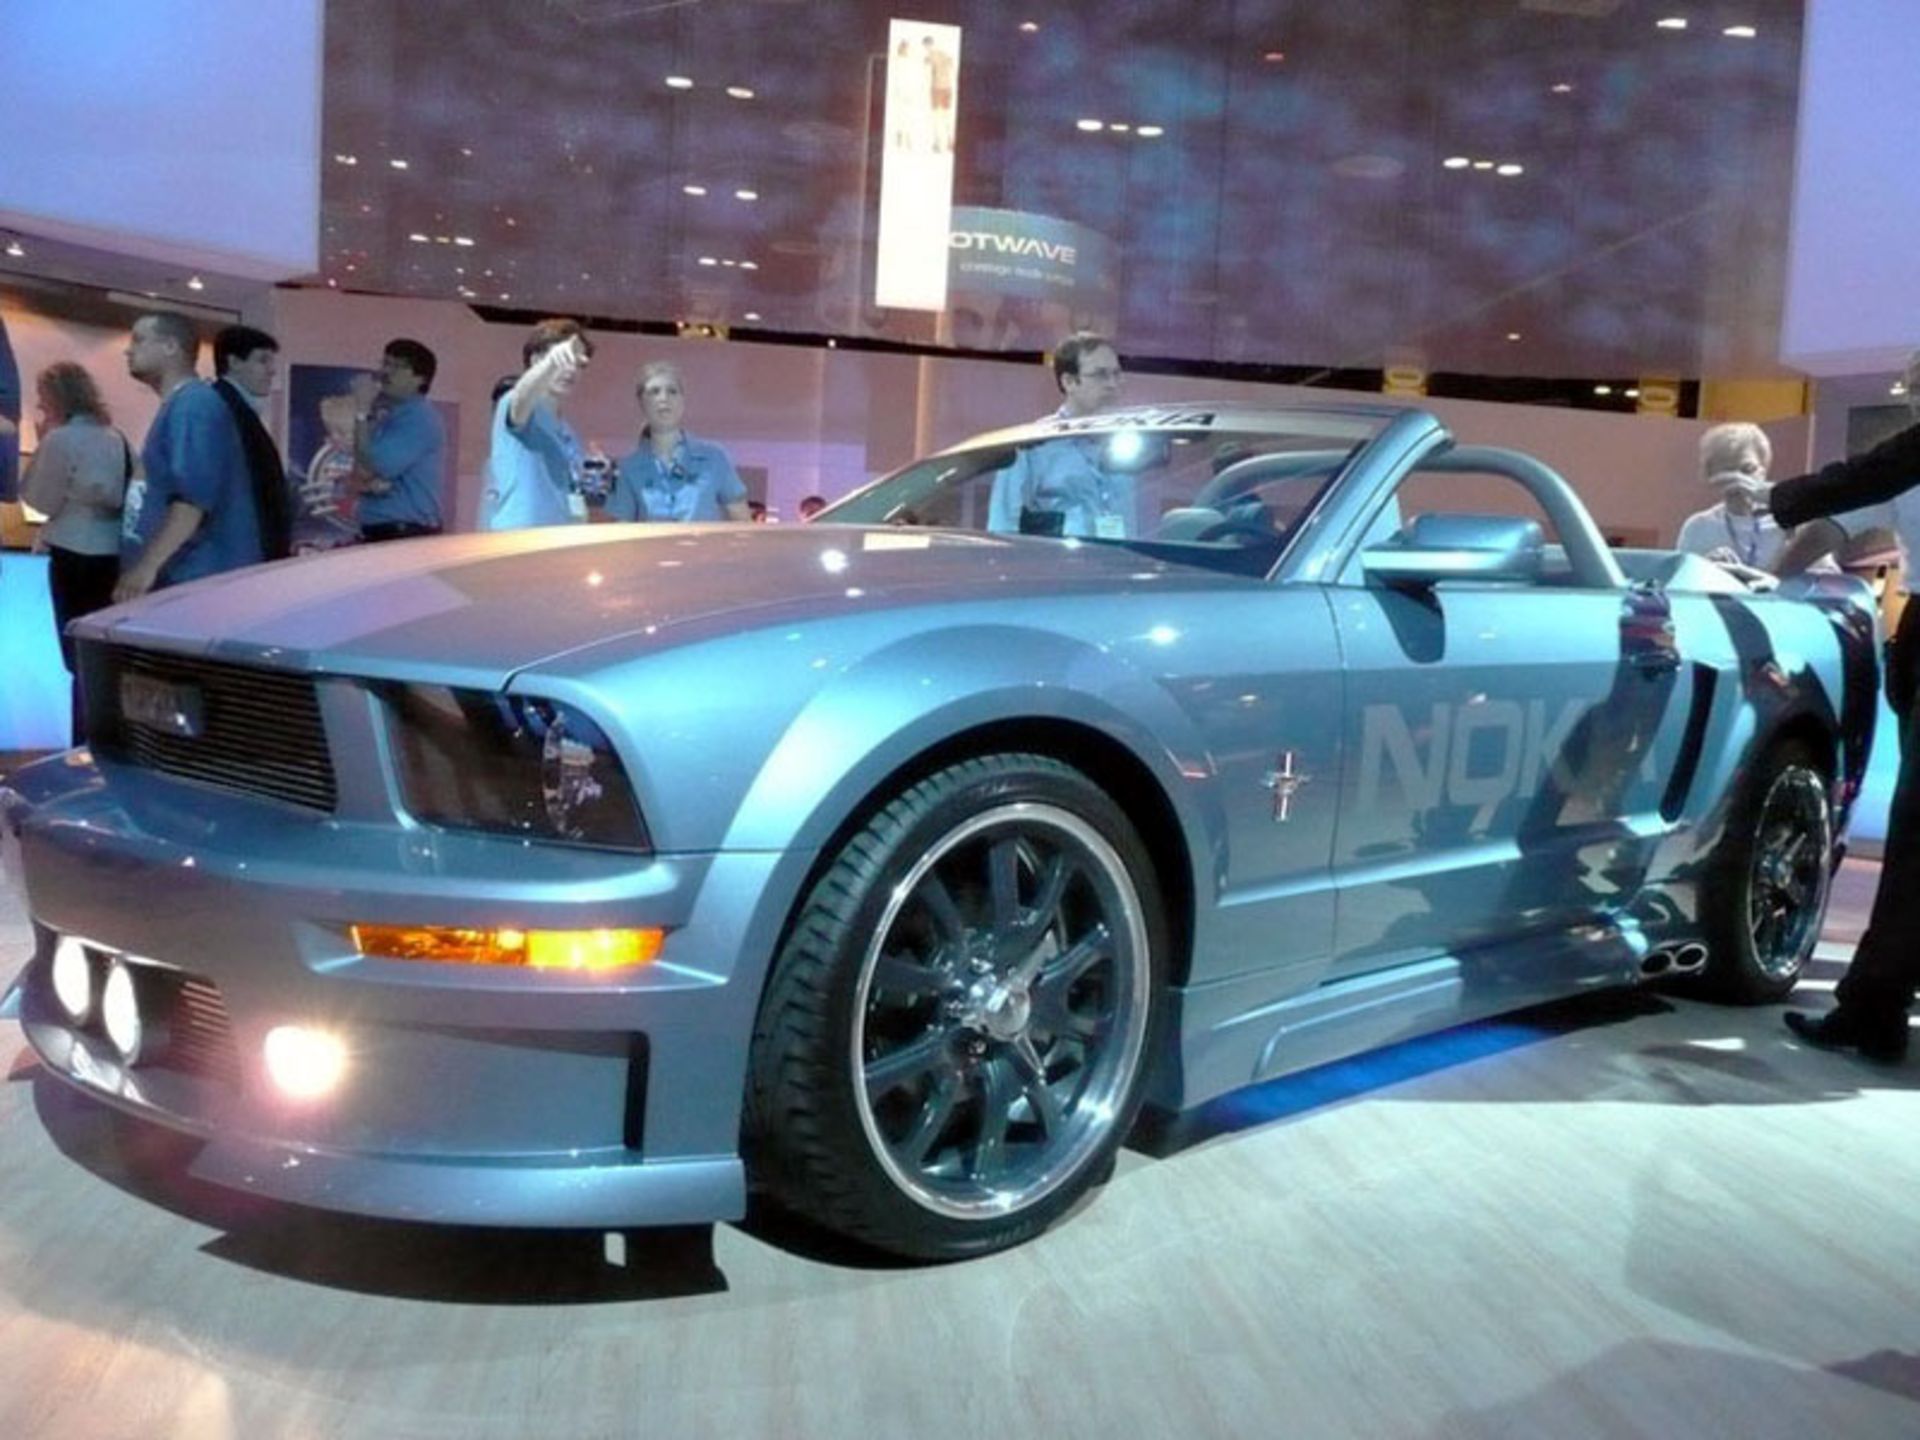 2006 Ford Mustang Convertible - Image 9 of 9